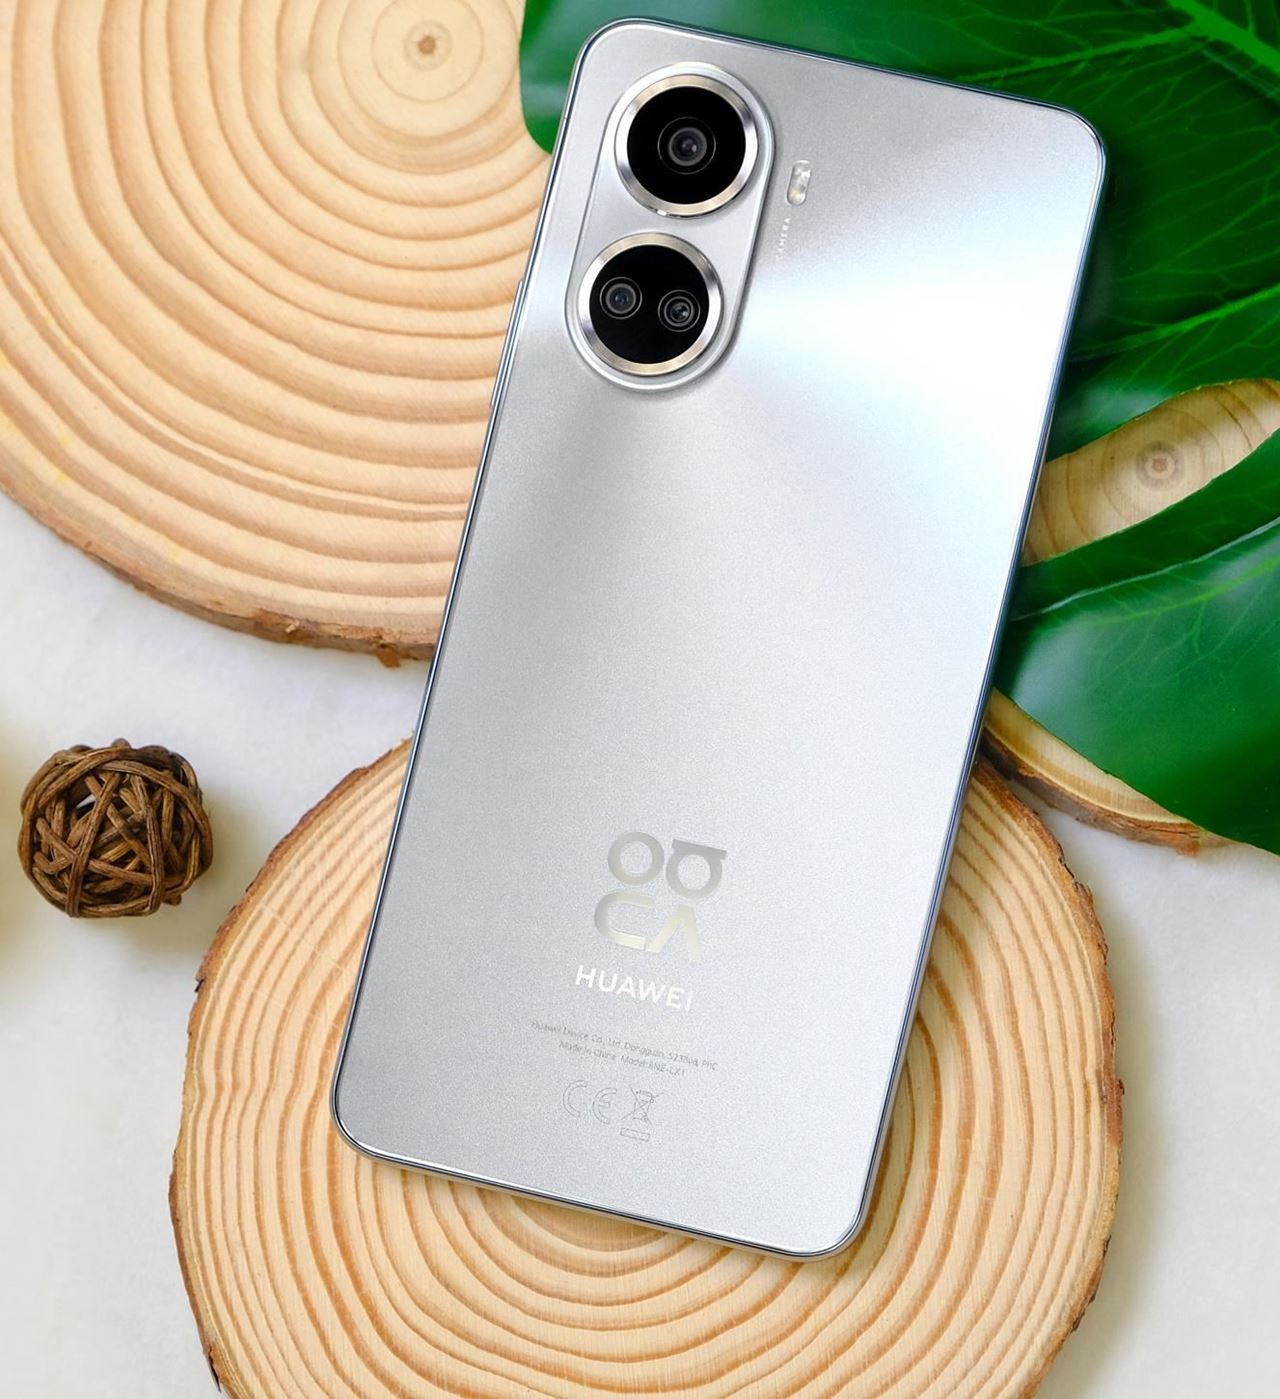 HUAWEI nova 10 SE - Here is what blew our minds in this stunning smartphone with 108MP Hi-Res camera and 66W HUAWEI SuperCharge